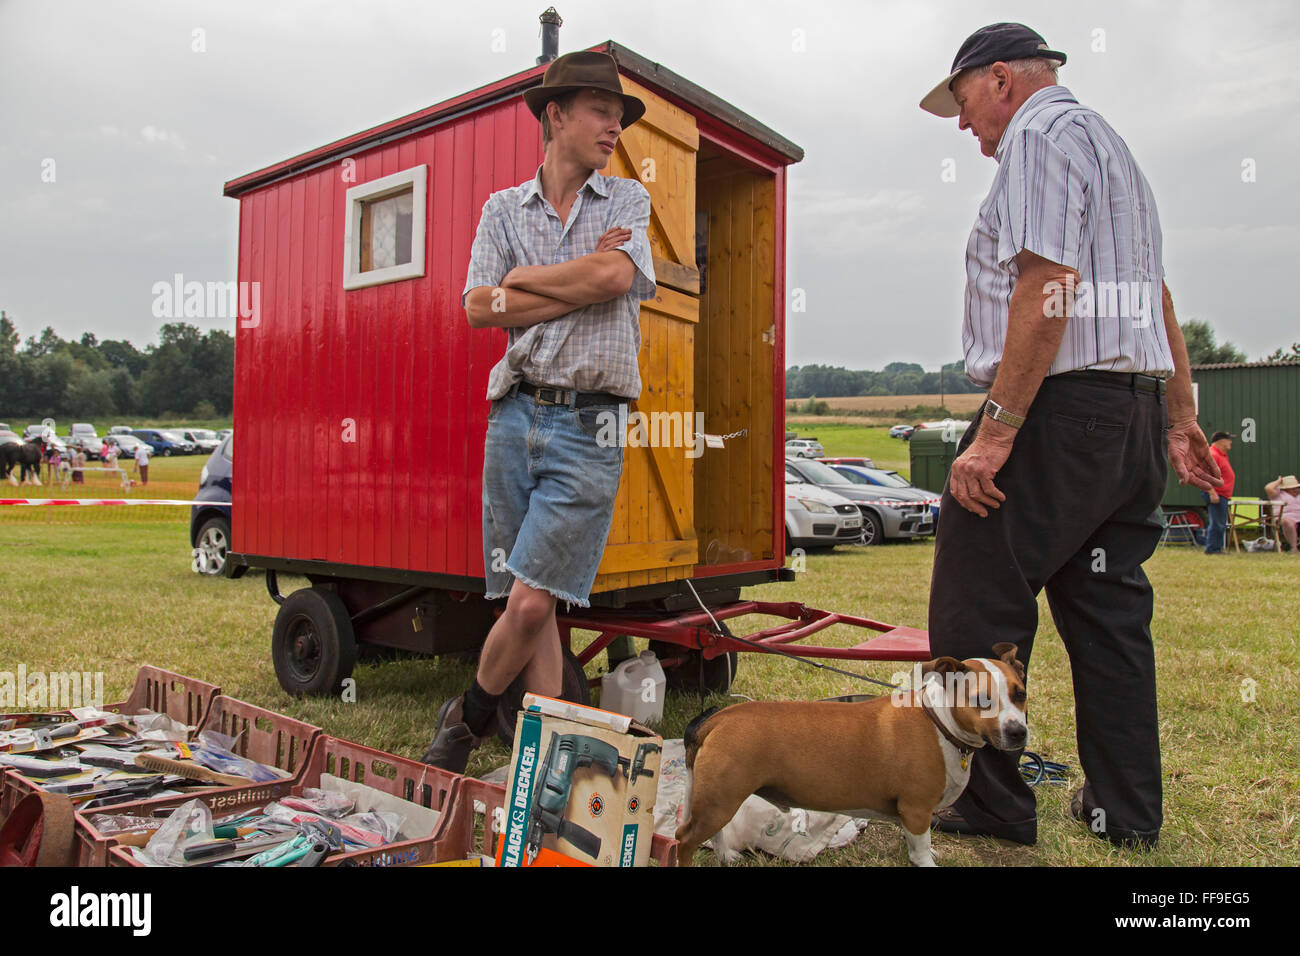 Two englishmen talk and a dog watches Stock Photo